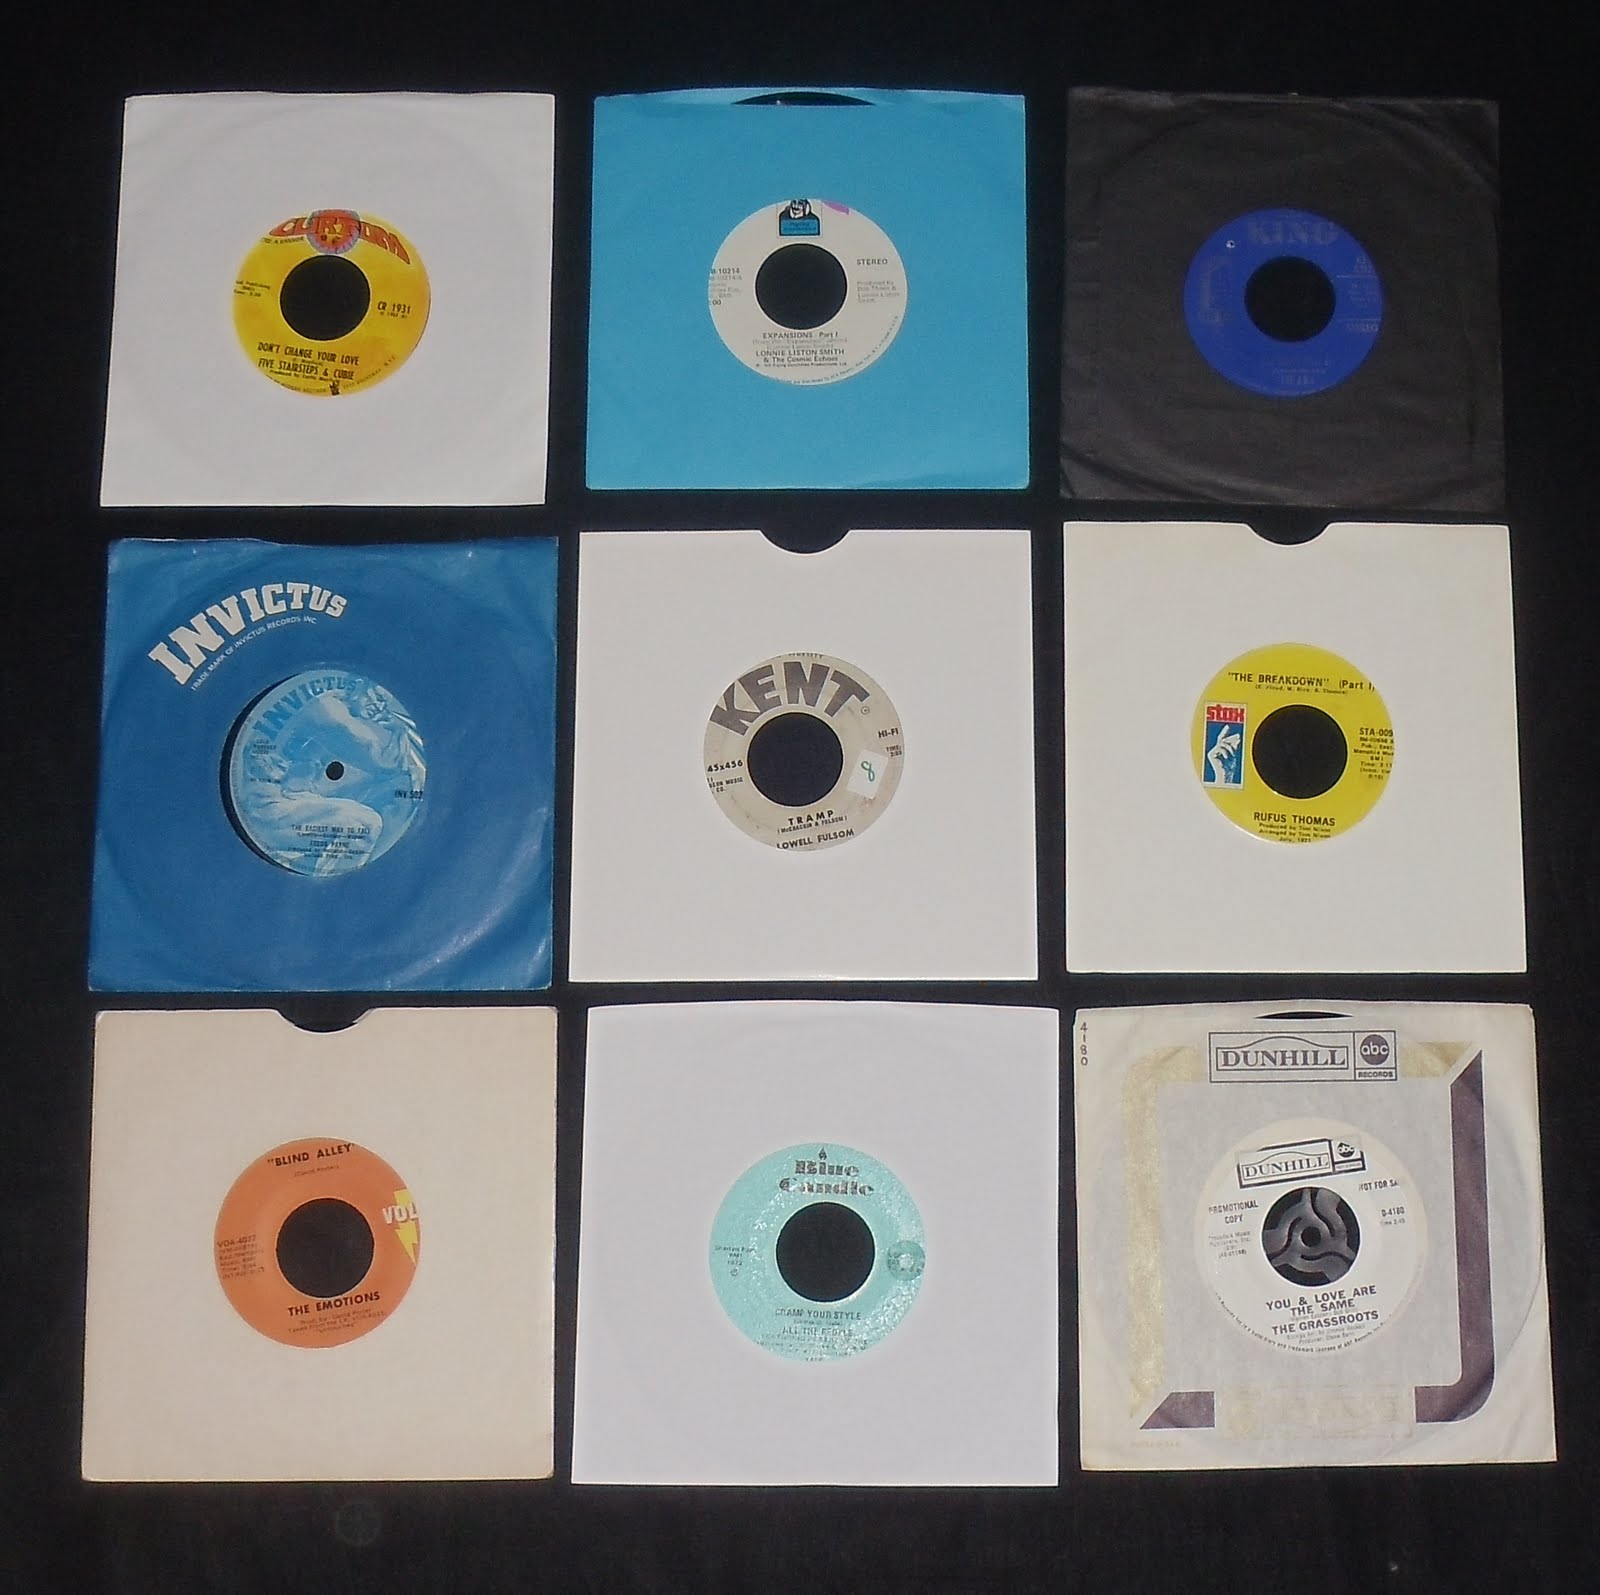 DAILY DIGGERS: Ultimate Breaks & Beats on 45rpm